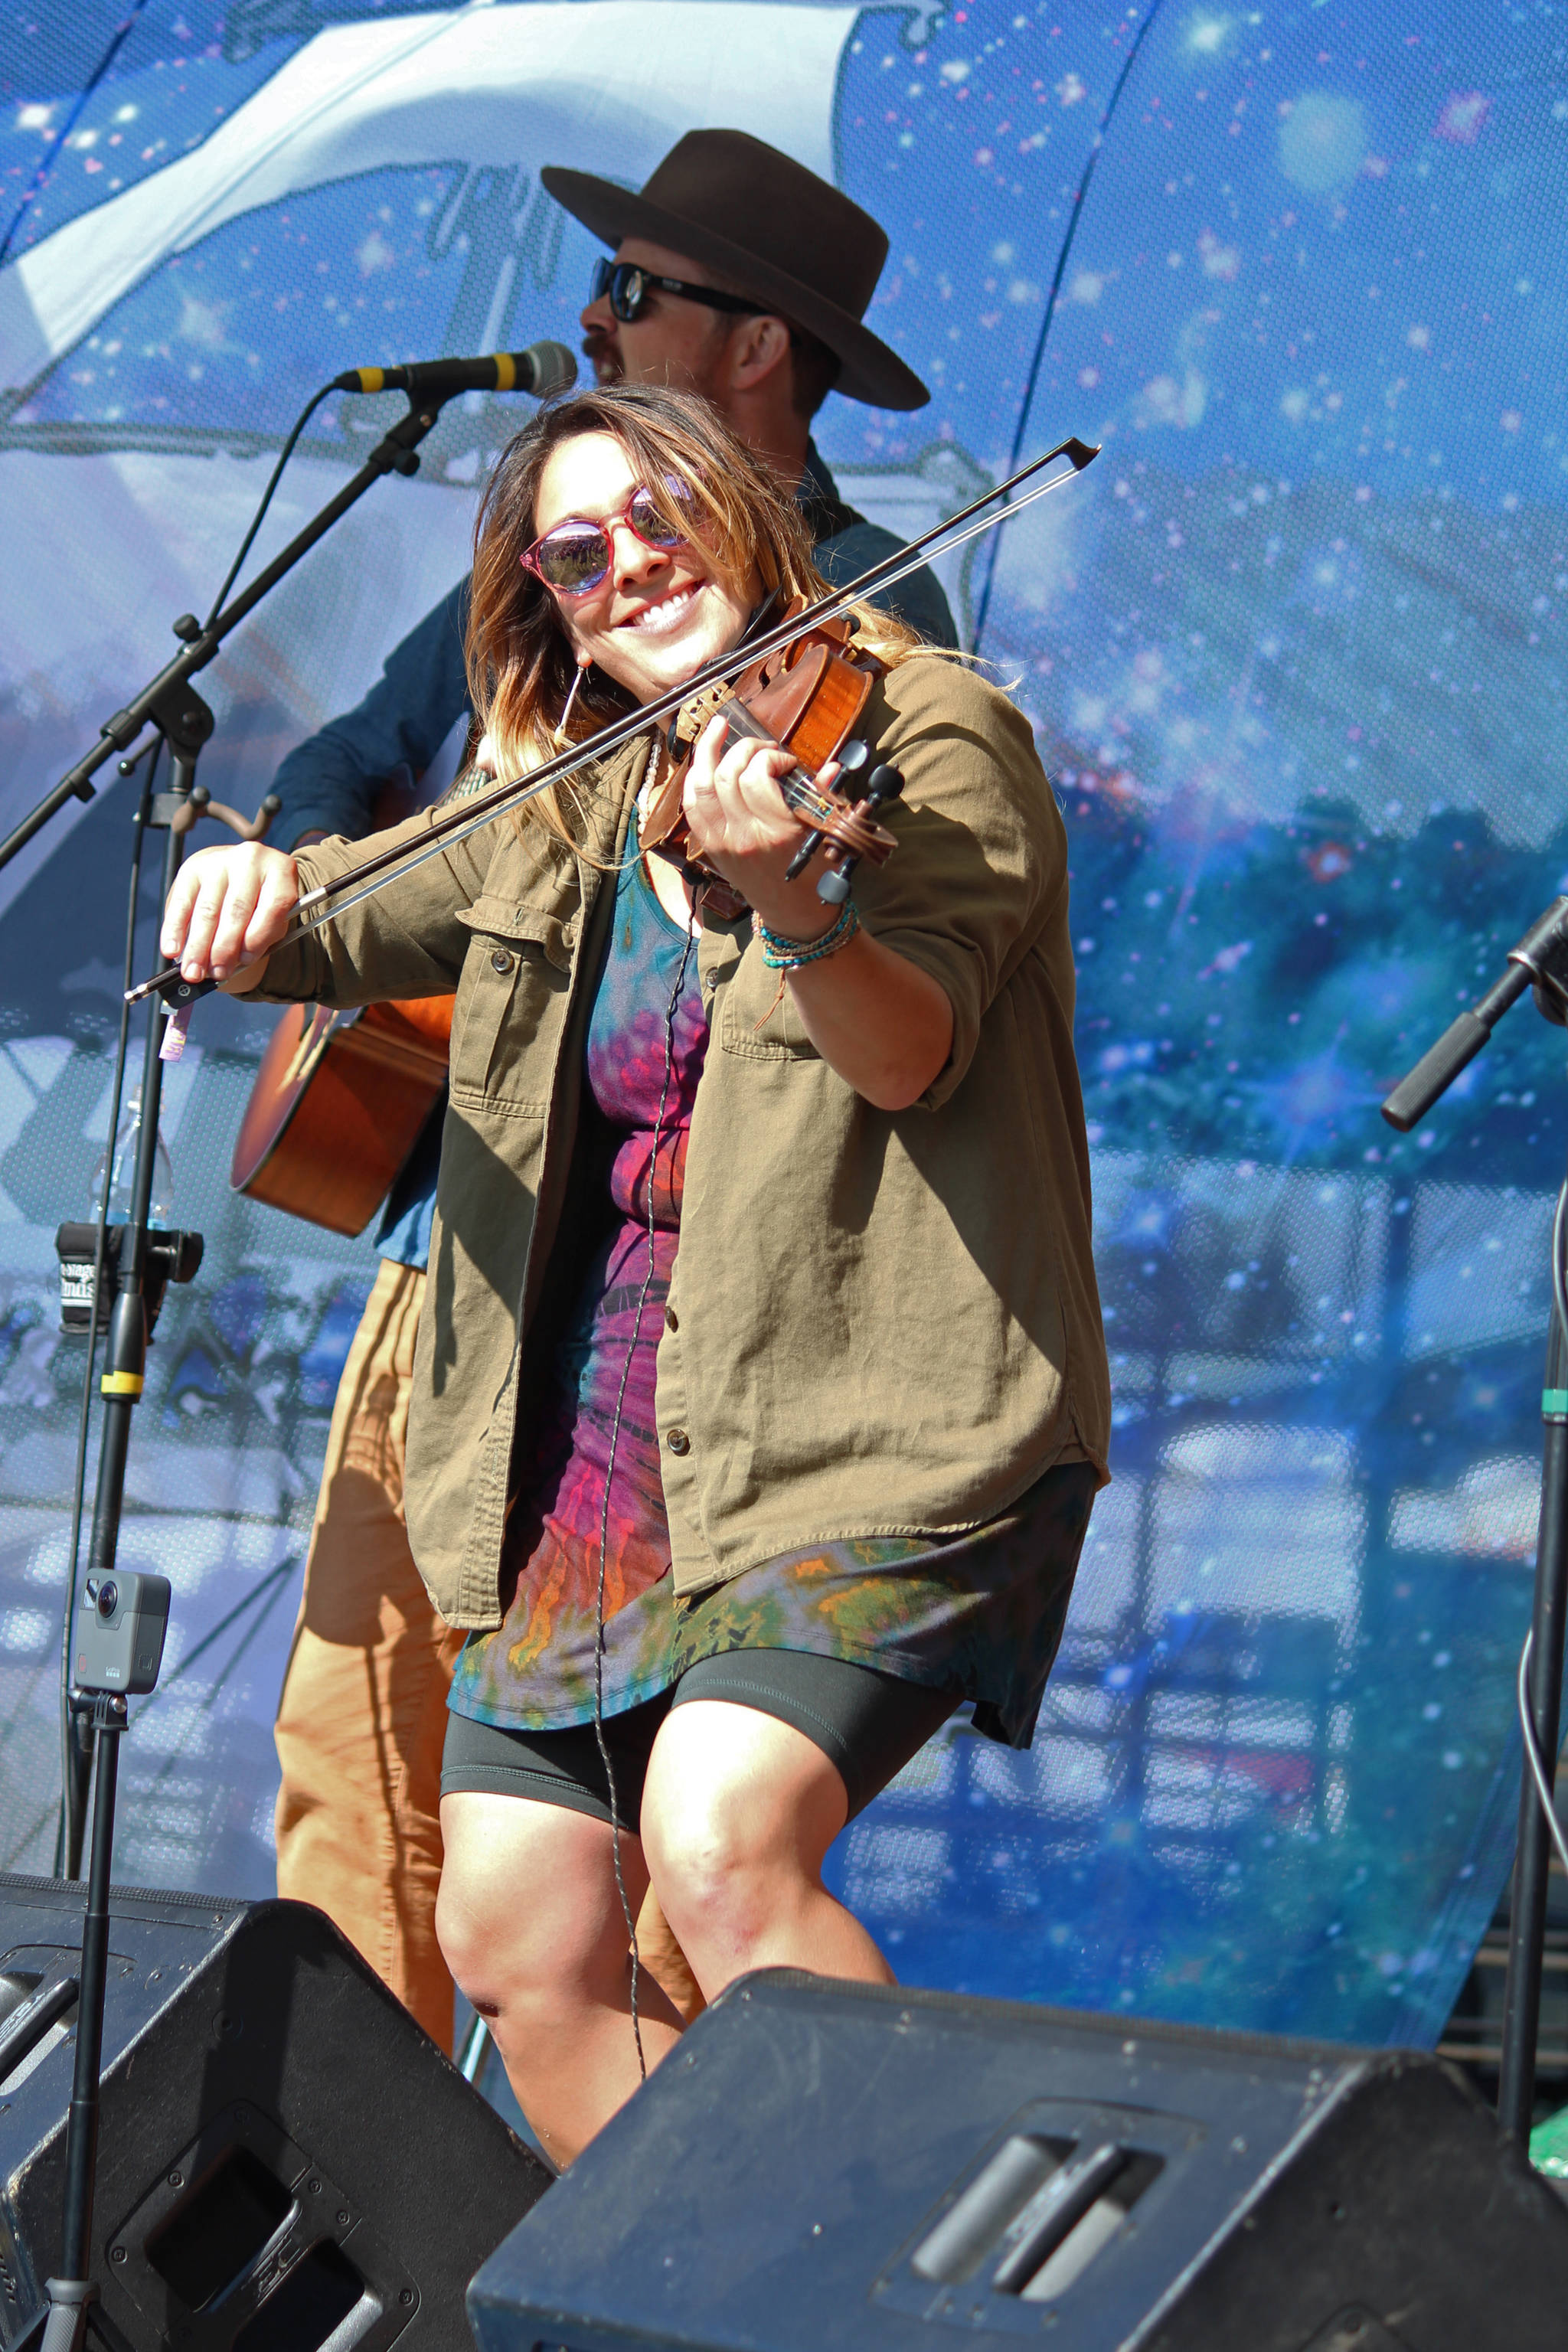 Nicole Campanale, fiddle player for Seward band Blackwater Railroad Company, performs with the band on the River Stage on Friday, Aug. 2, 2019 at Salmonfest in Ninilchik, Alaska. (Photo by Megan Pacer/Homer New